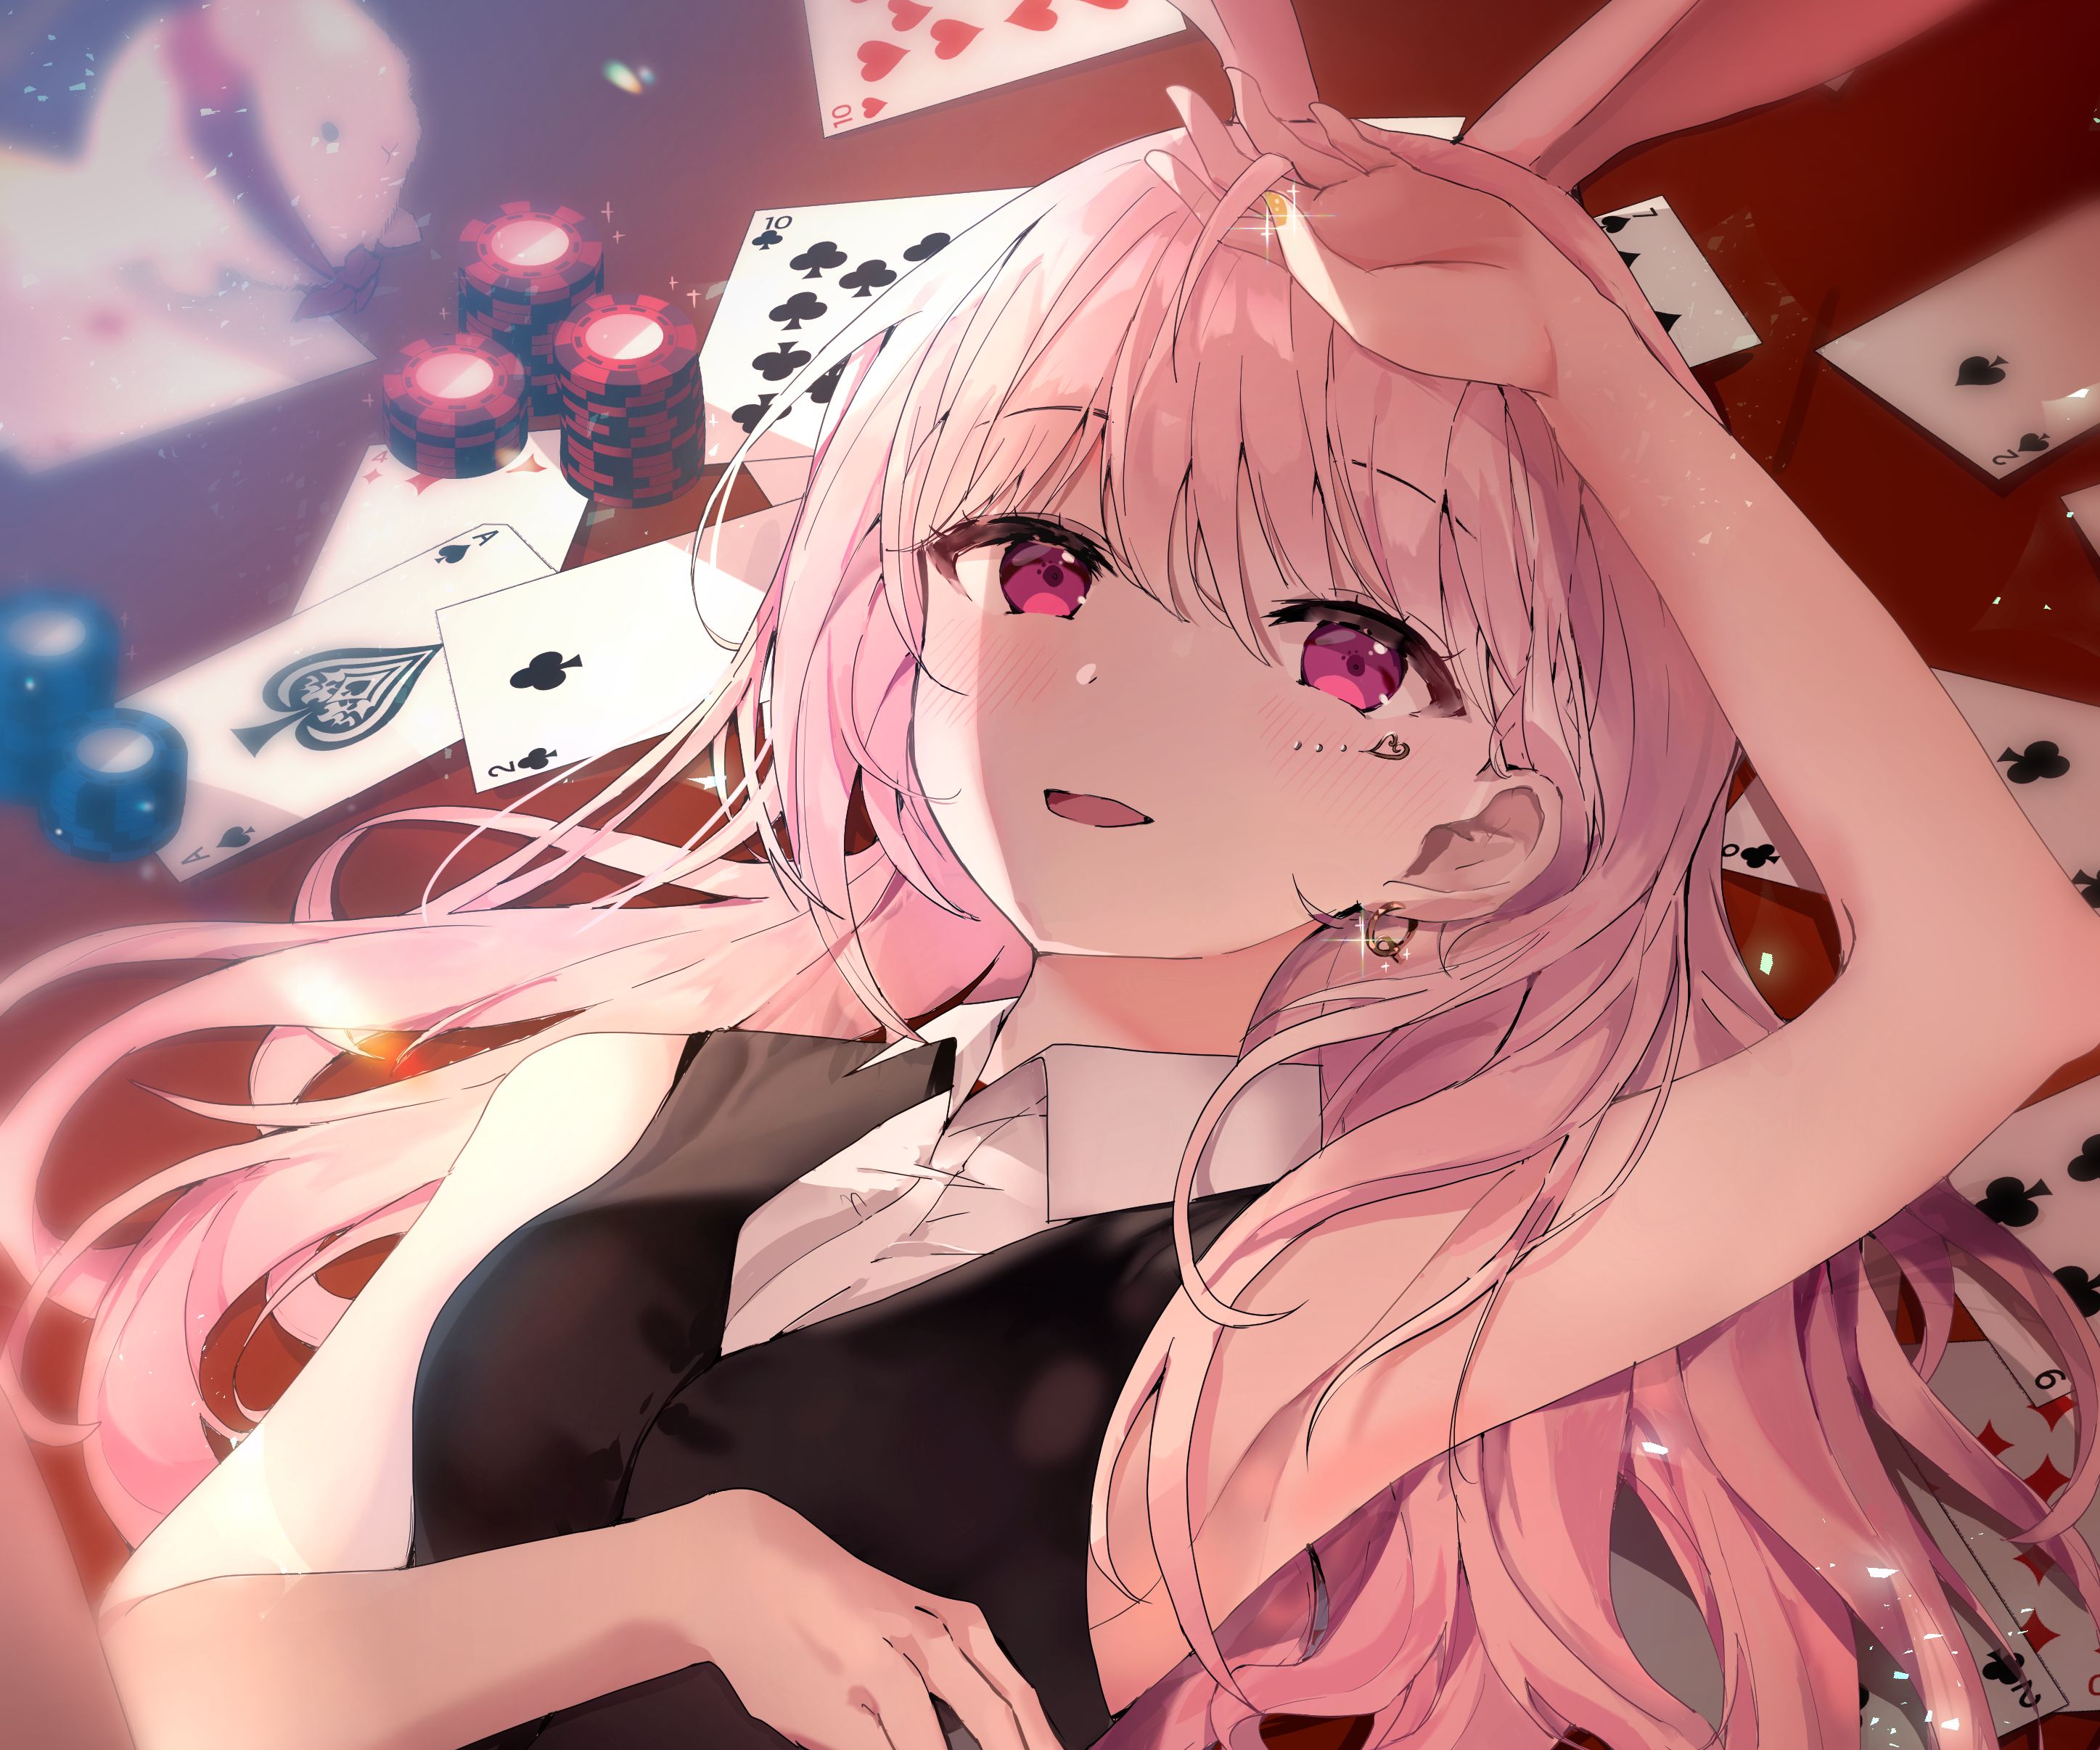 The Anime Girl With Pink Hair Is Laying Down In The Air Background Picture  Of Tumbler Background Image And Wallpaper for Free Download